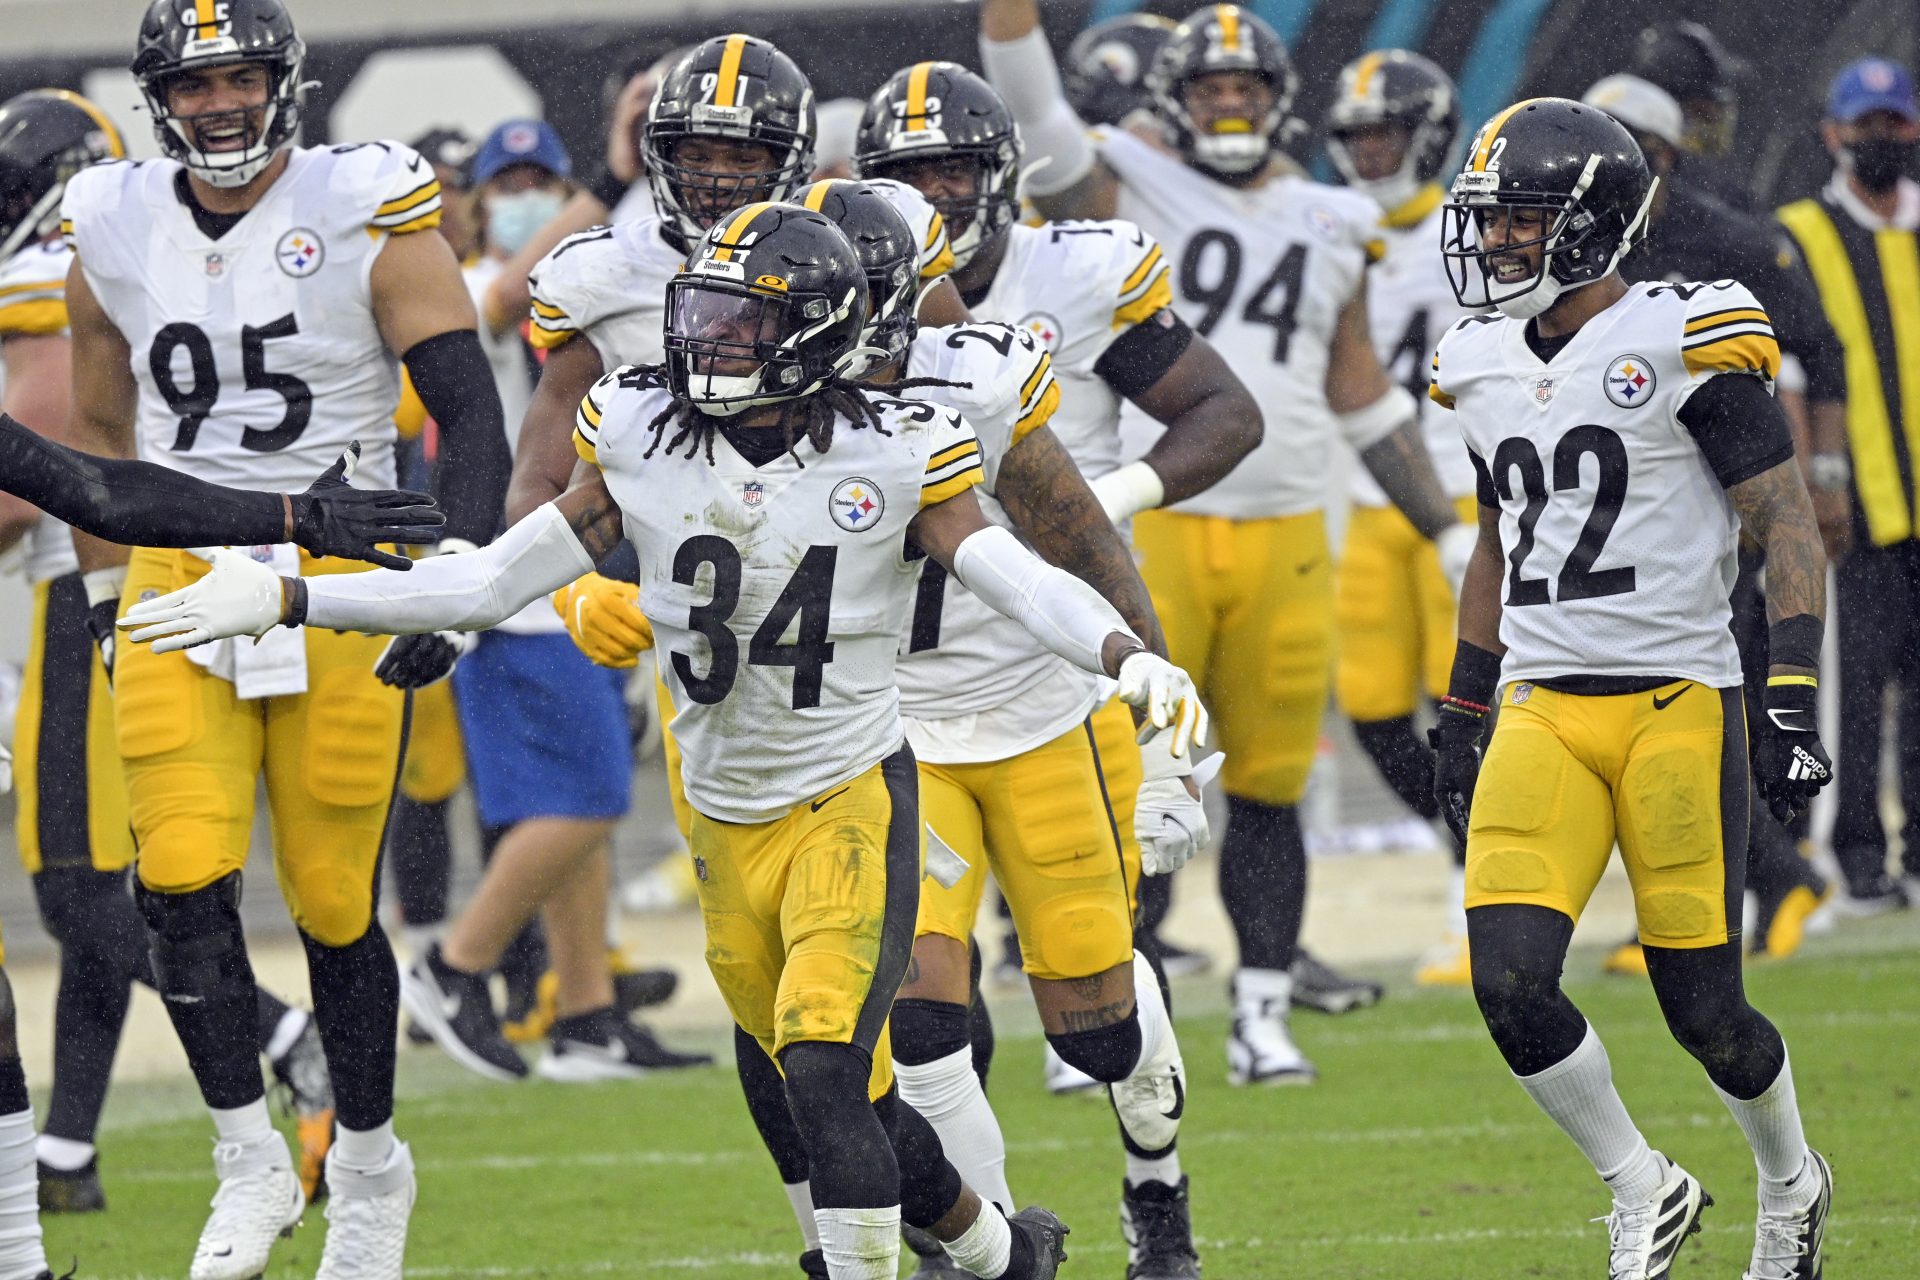 Pittsburgh Steelers safety Terrell Edmunds (34) celebrates with teammates after he intercepted a Jacksonville Jaguars pass during the second half of an NFL football game, Sunday, Nov. 22, 2020, in Jacksonville, Fla.